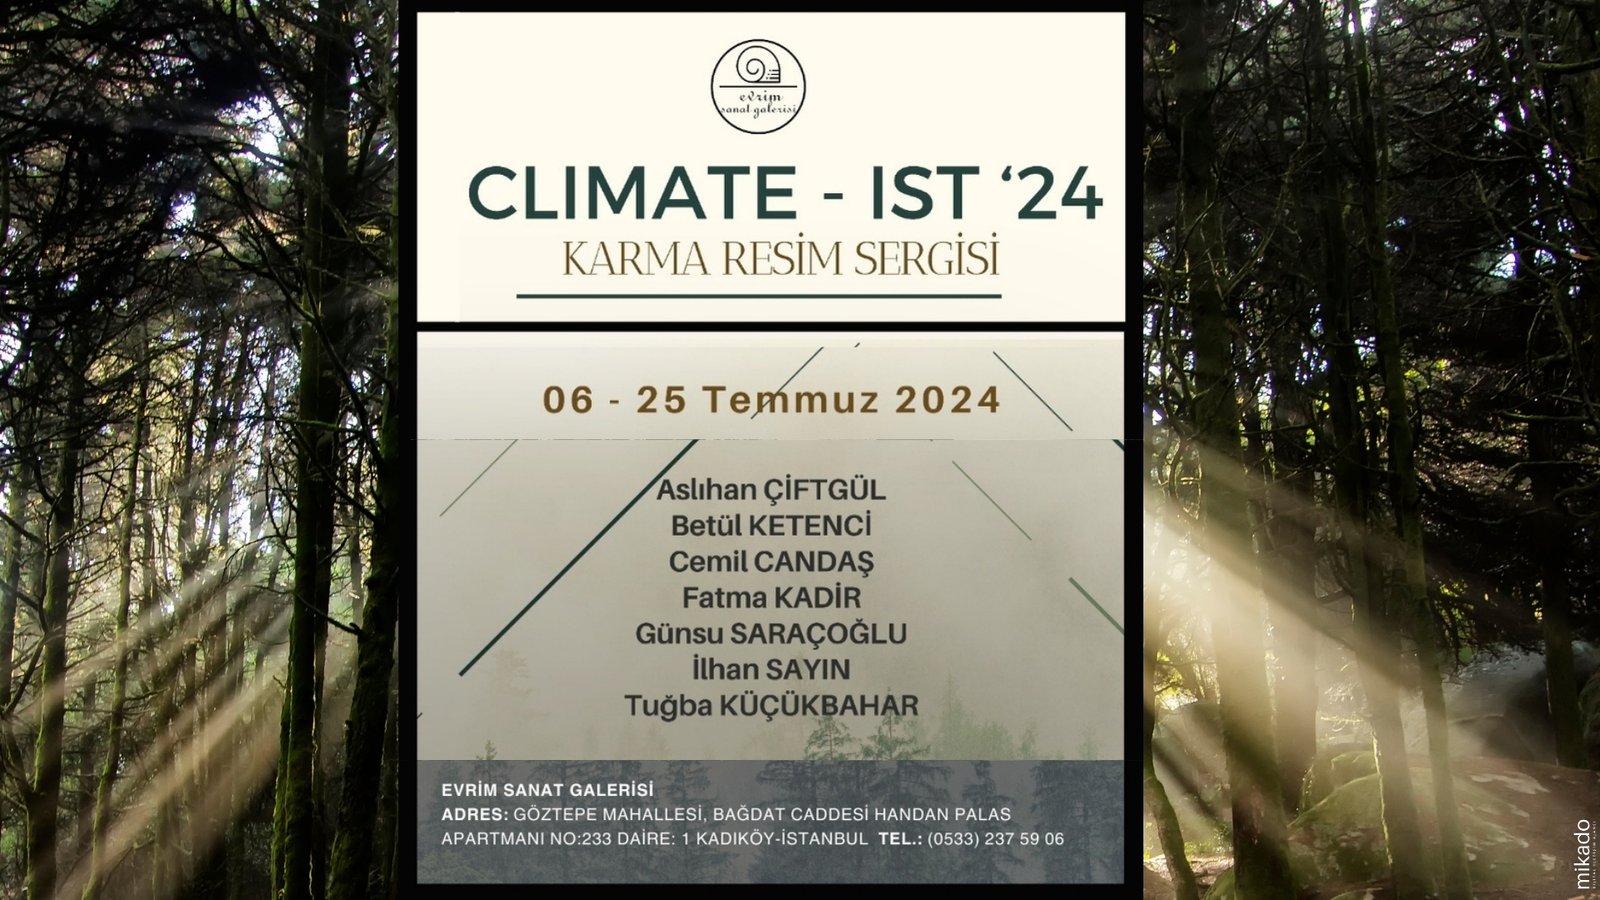 The “climate Ist’24” Exhibition Has Opened Its Doors A Meeting For Art And Nature